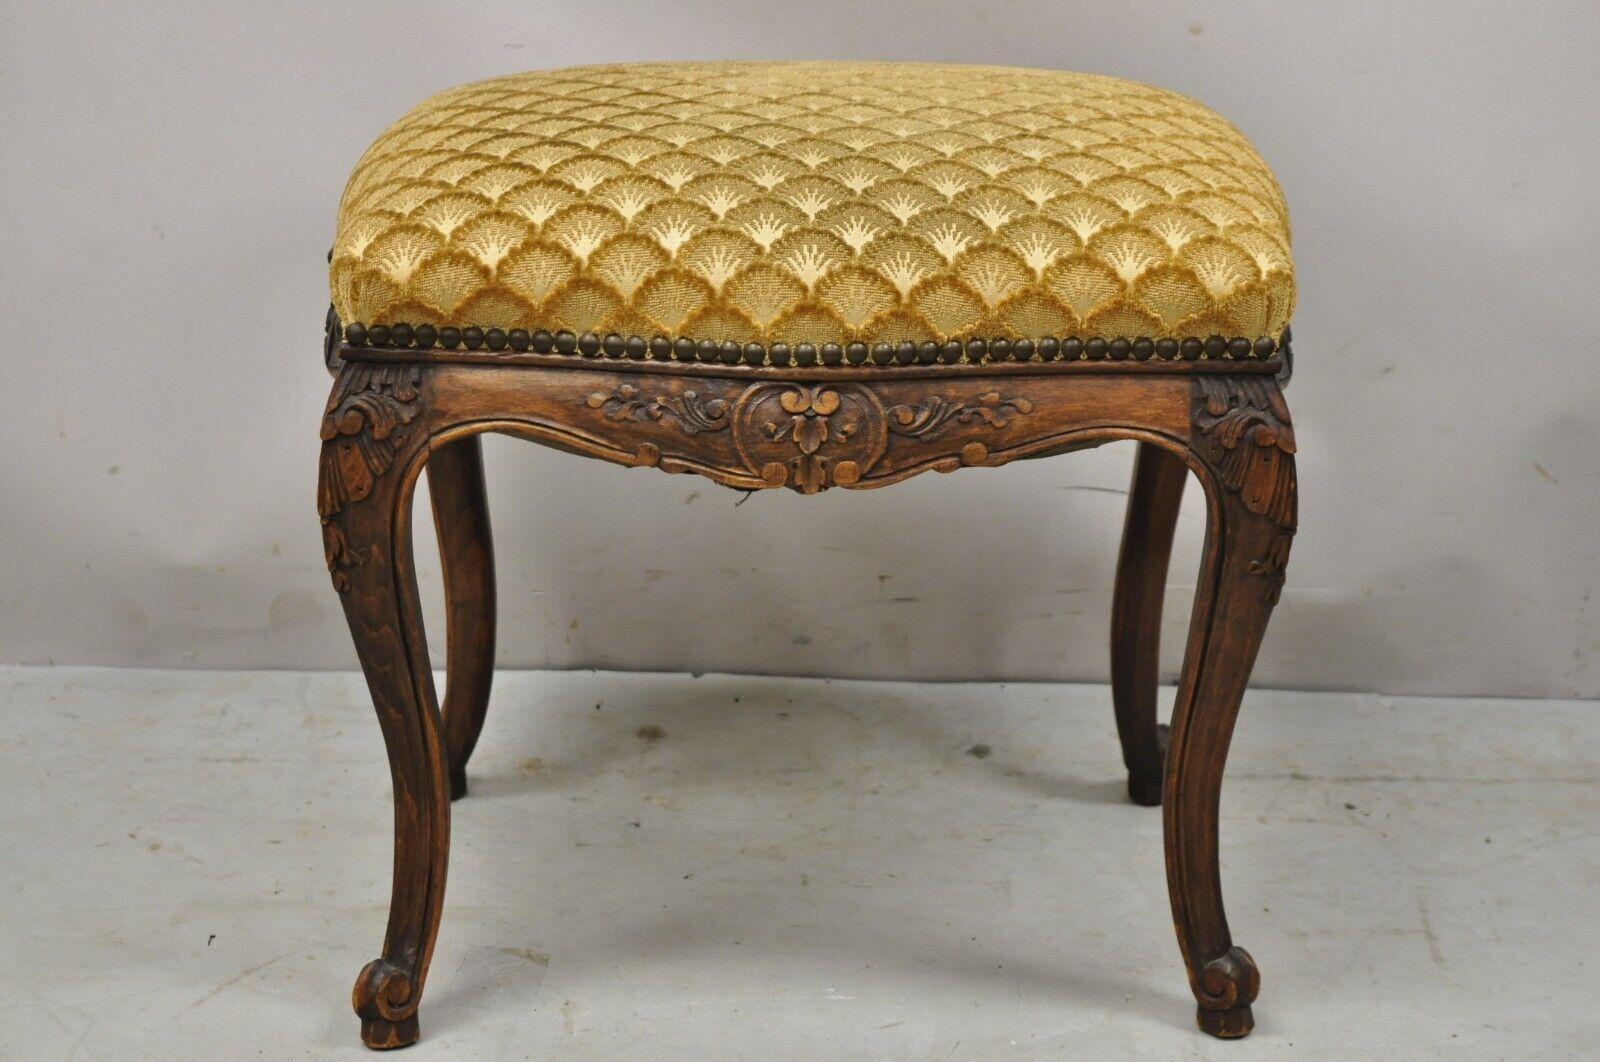 Antique French Louis XV Style Carved Walnut Orange Footstool Ottoman. Item features beautiful wood grain, nicely carved details, cabriole legs, very nice antique item, great style and form. Circa Early 20th Century. Measurements: 18